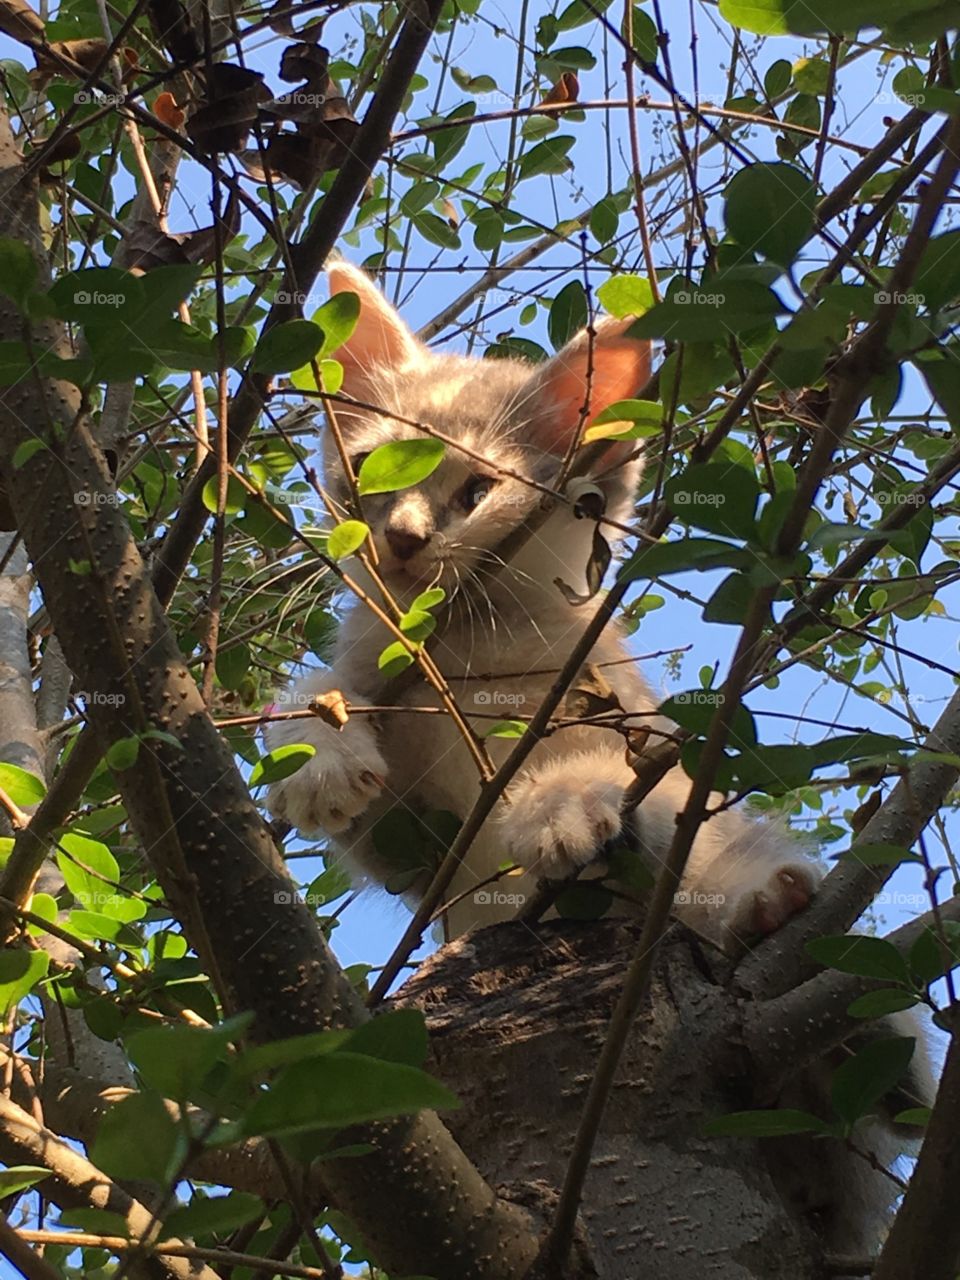 Cutest in the tree tops